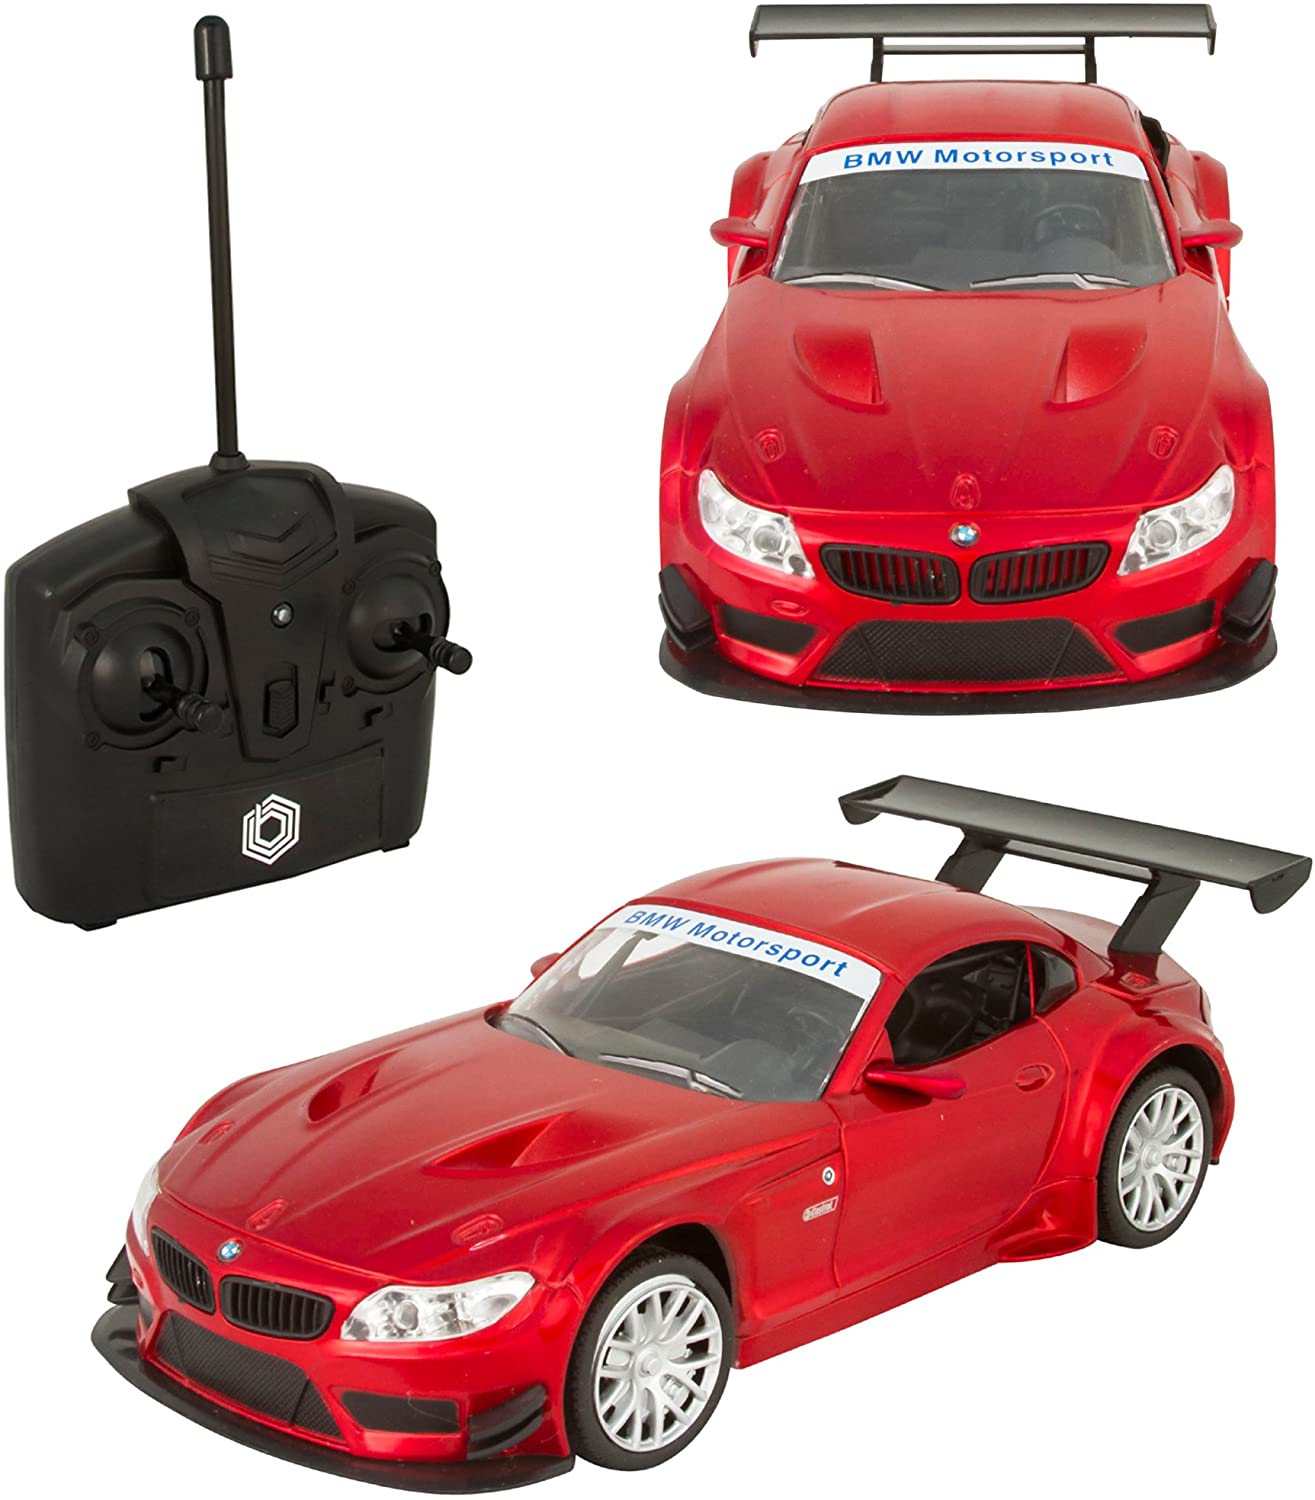 Braha Full Function Remote Control Vehicle - 1:24 Scale BMW Z4 RC Car, Red